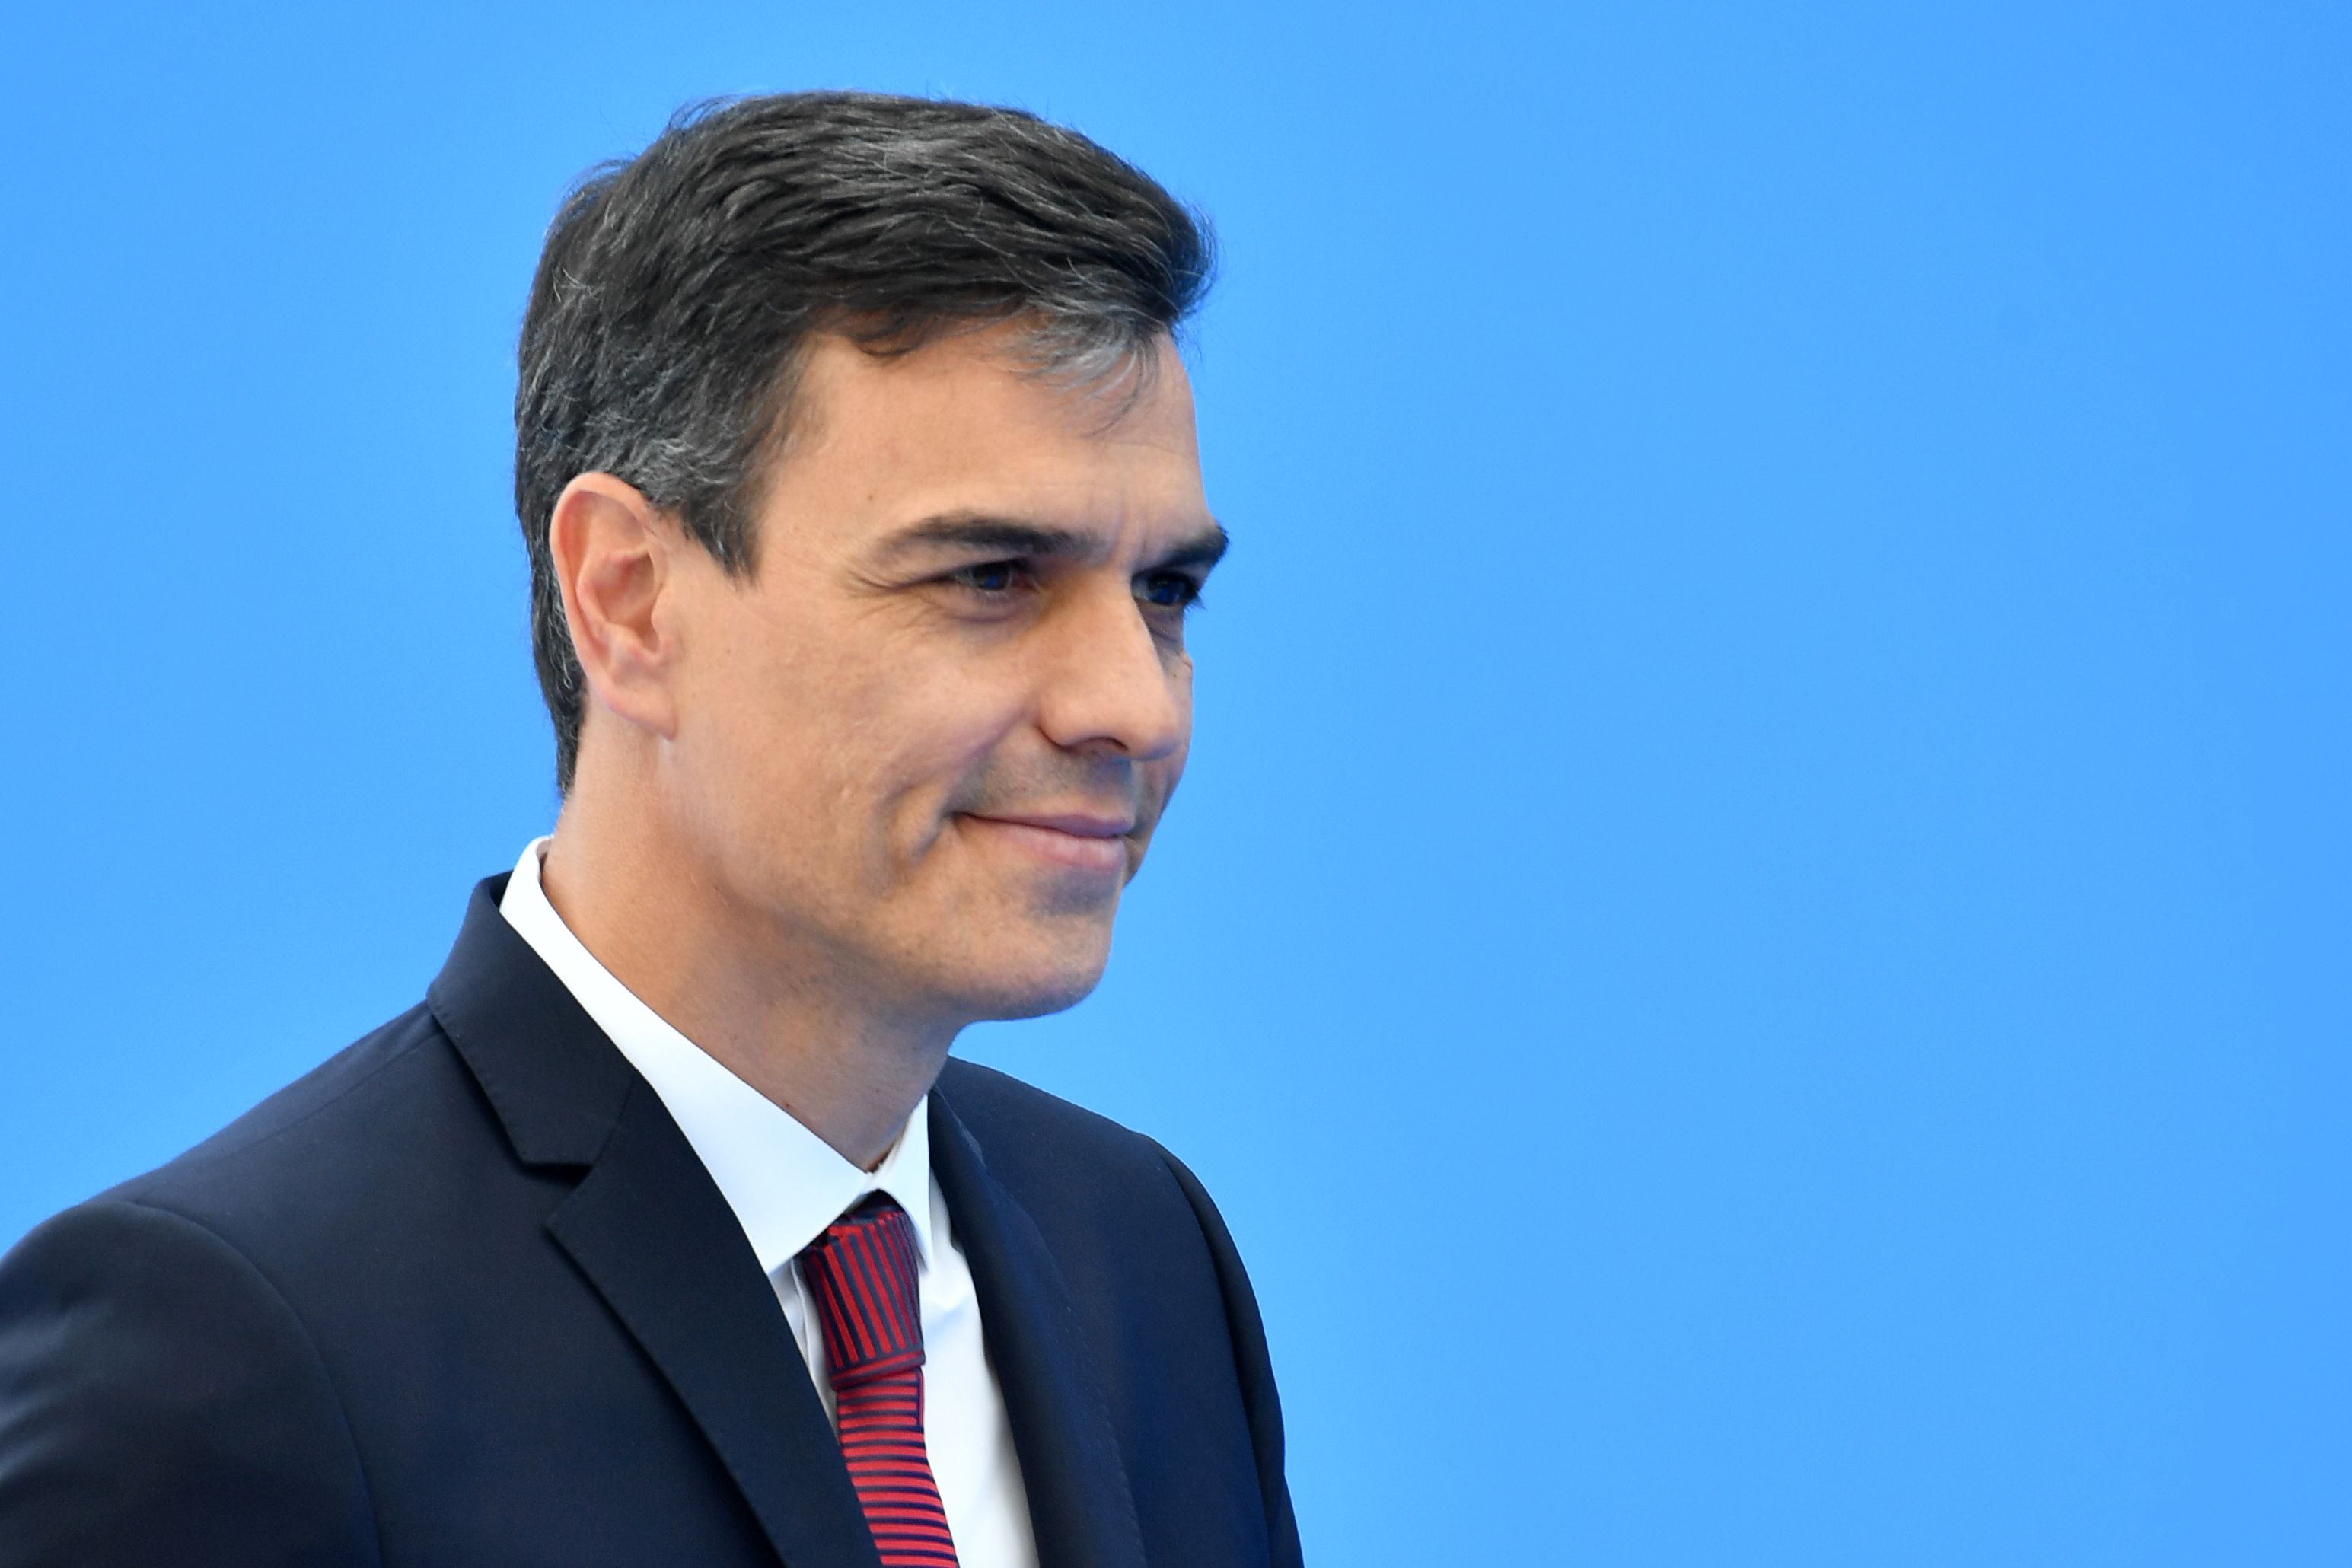 Spain's Prime Minister Pedro Sanchez arrives to attend the NATO summit